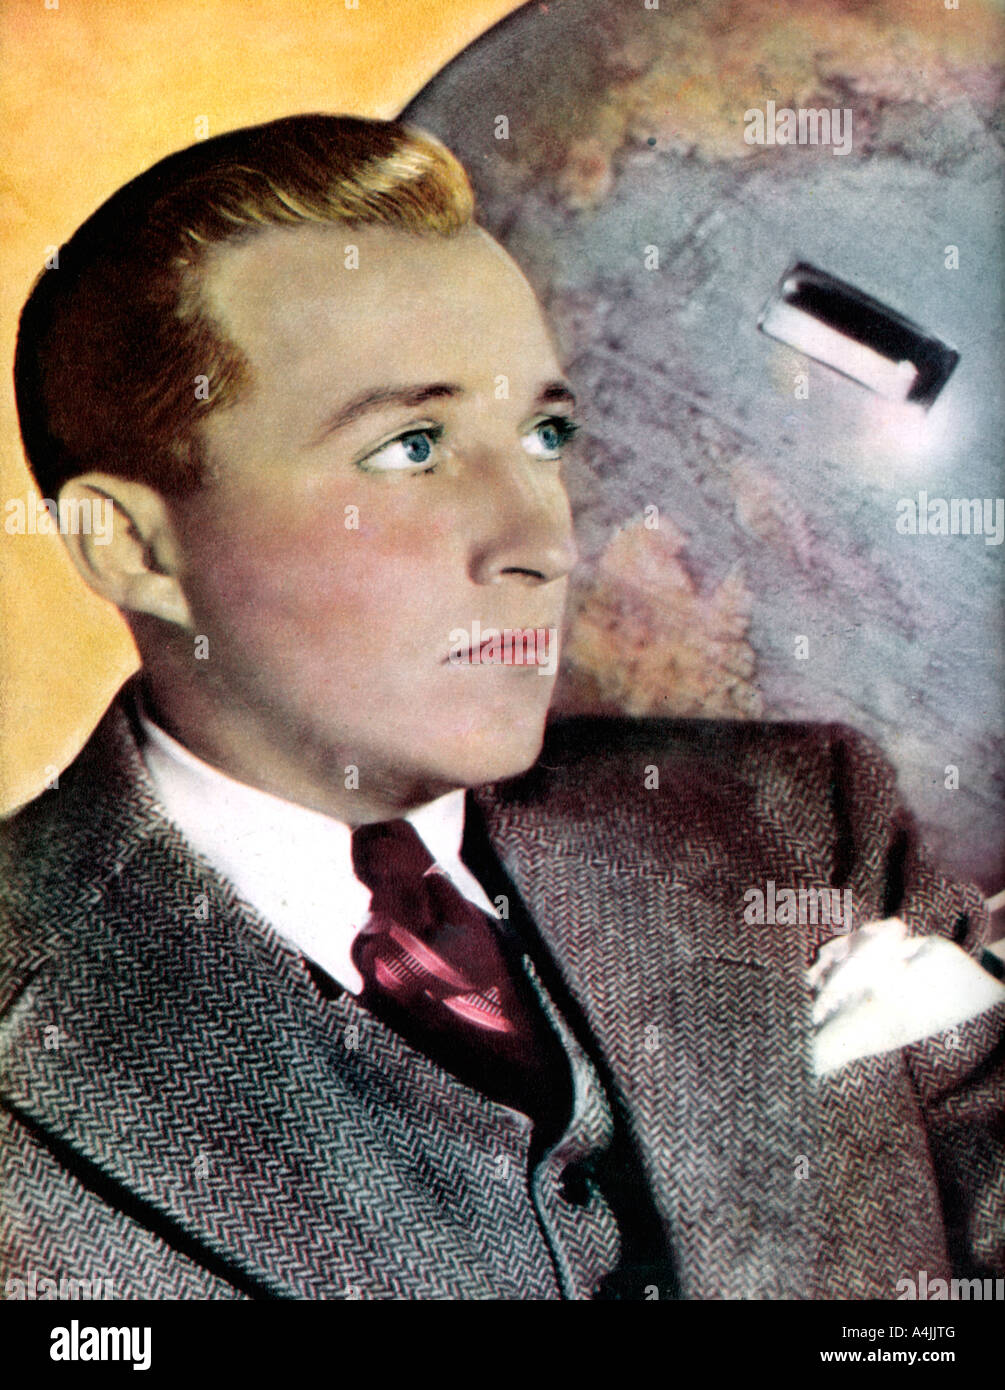 Bing Crosby, American singer and actor, 1934-1935. Artist: Unknown Stock Photo